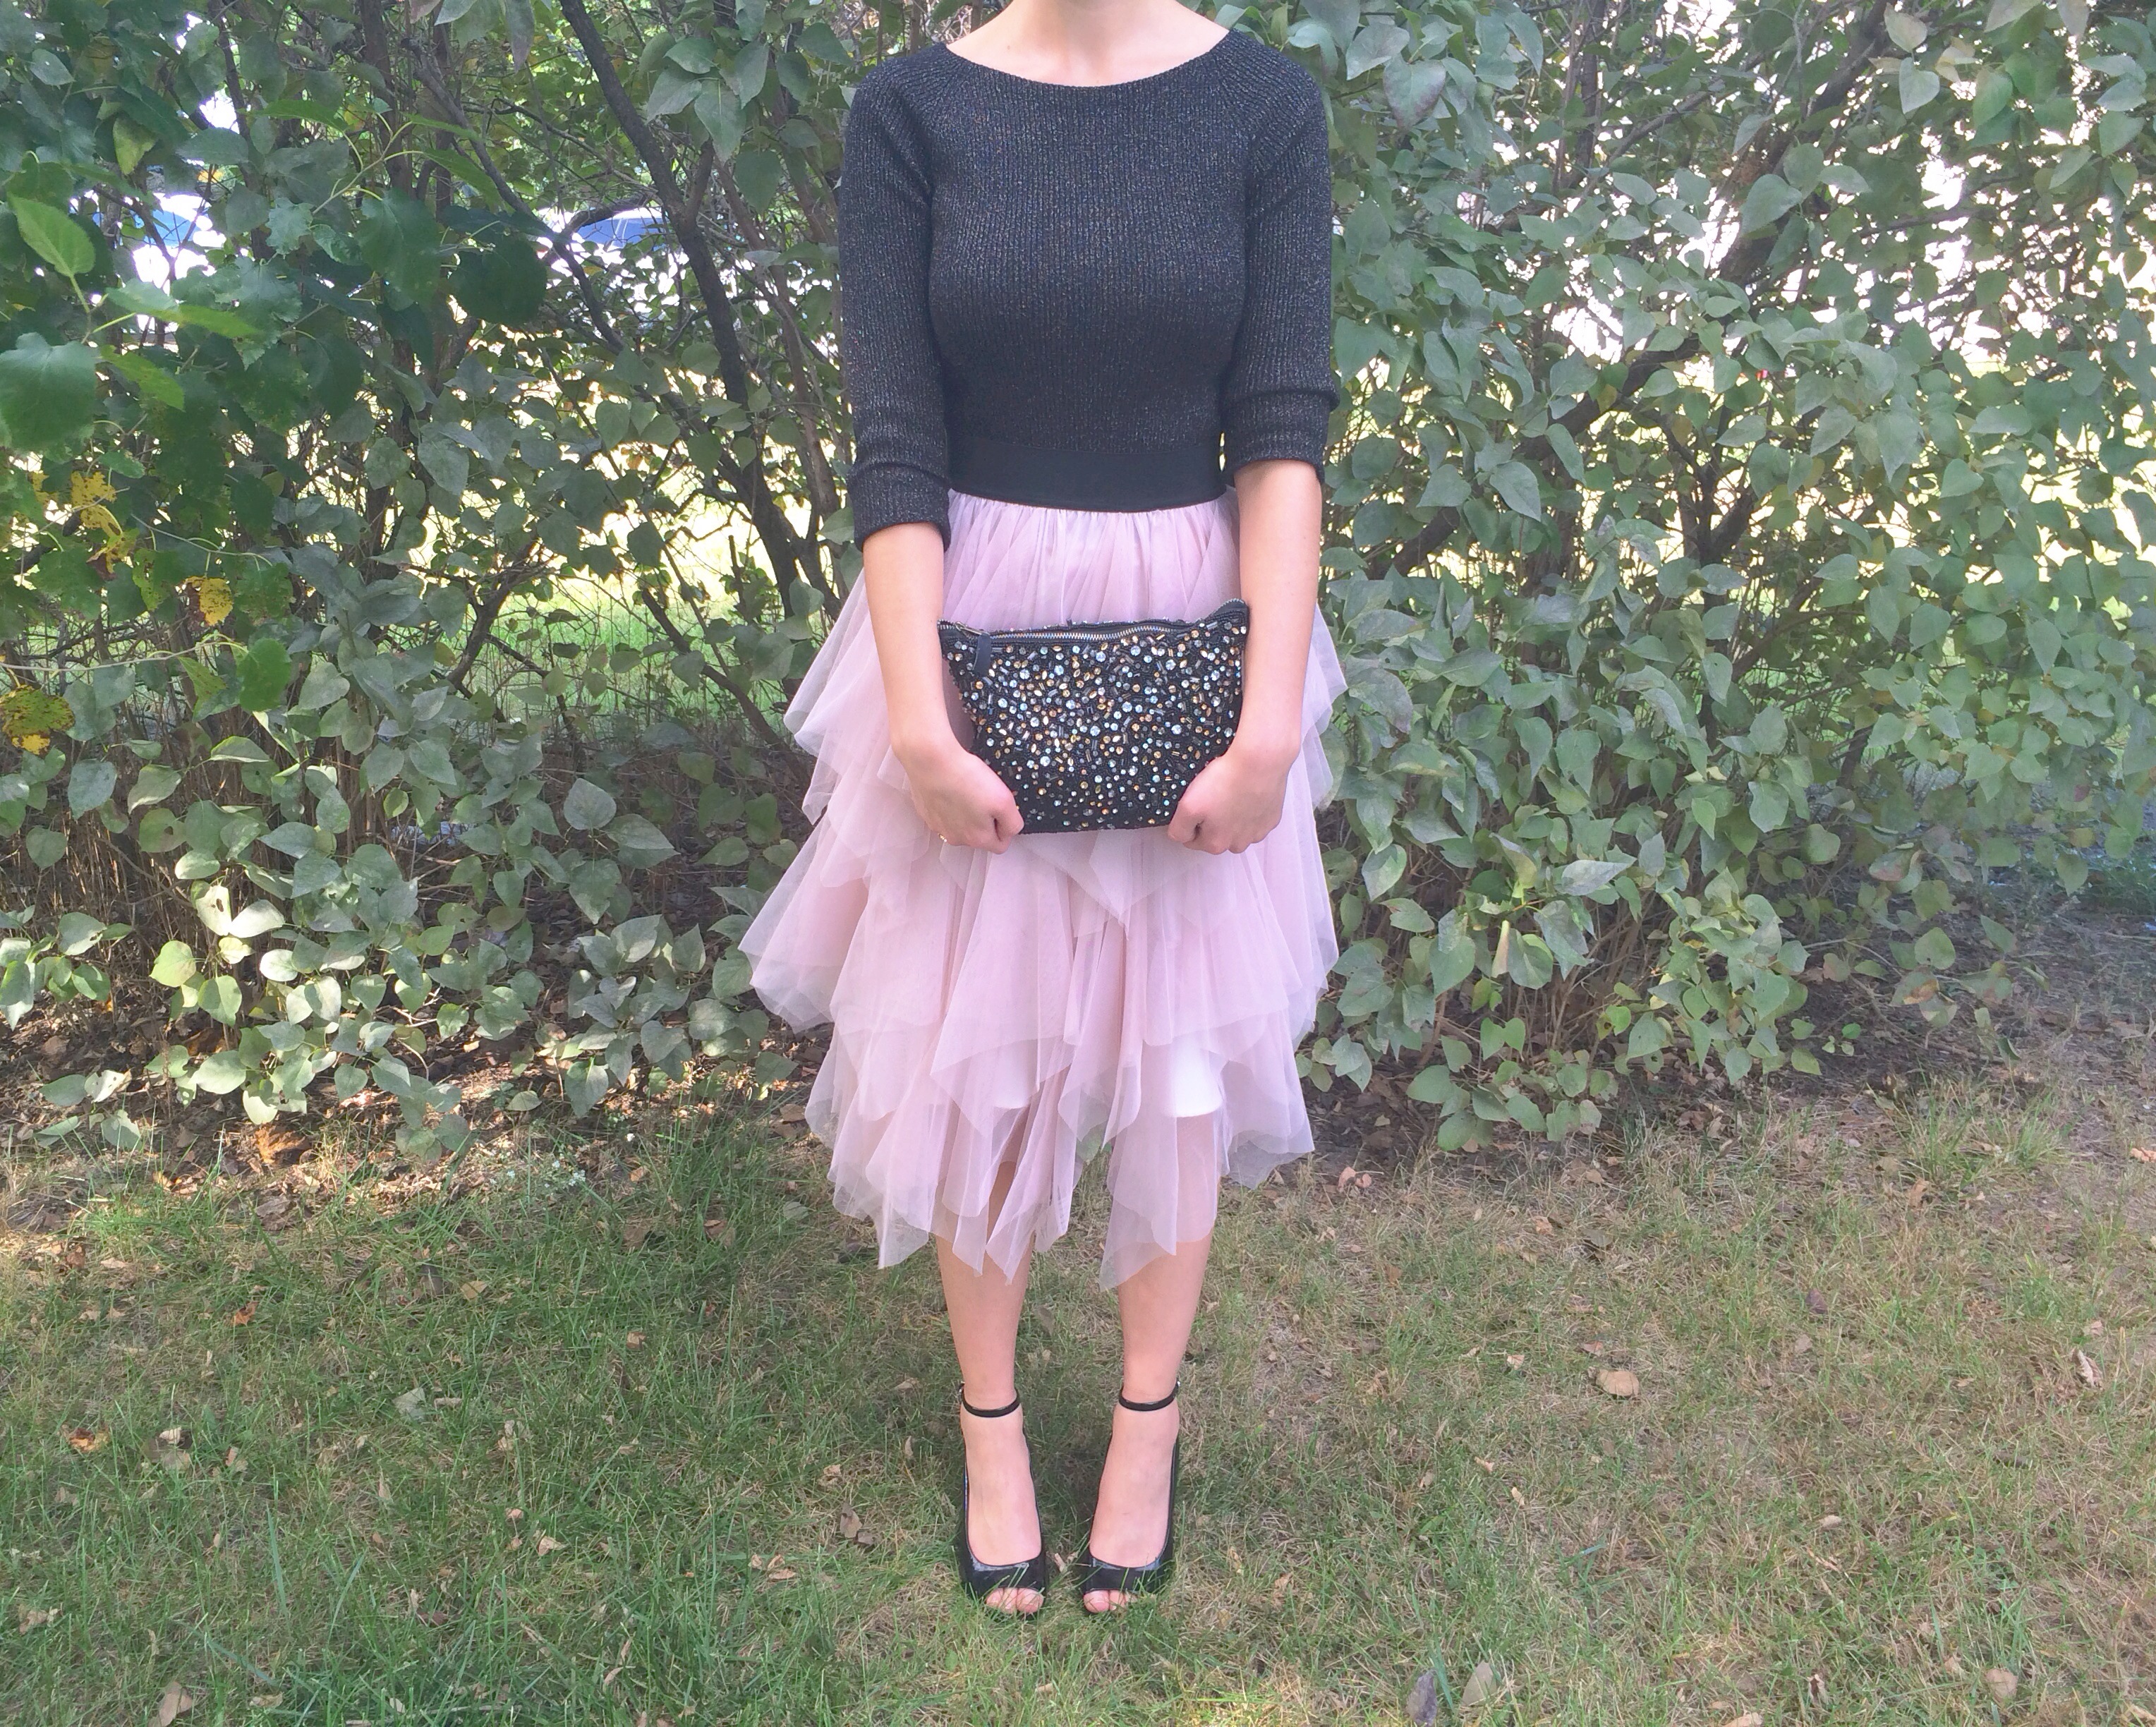 The Cotton Candy Tutu | Indian Summer Outfit Inspo by Nicole Arnold on She's Intentional